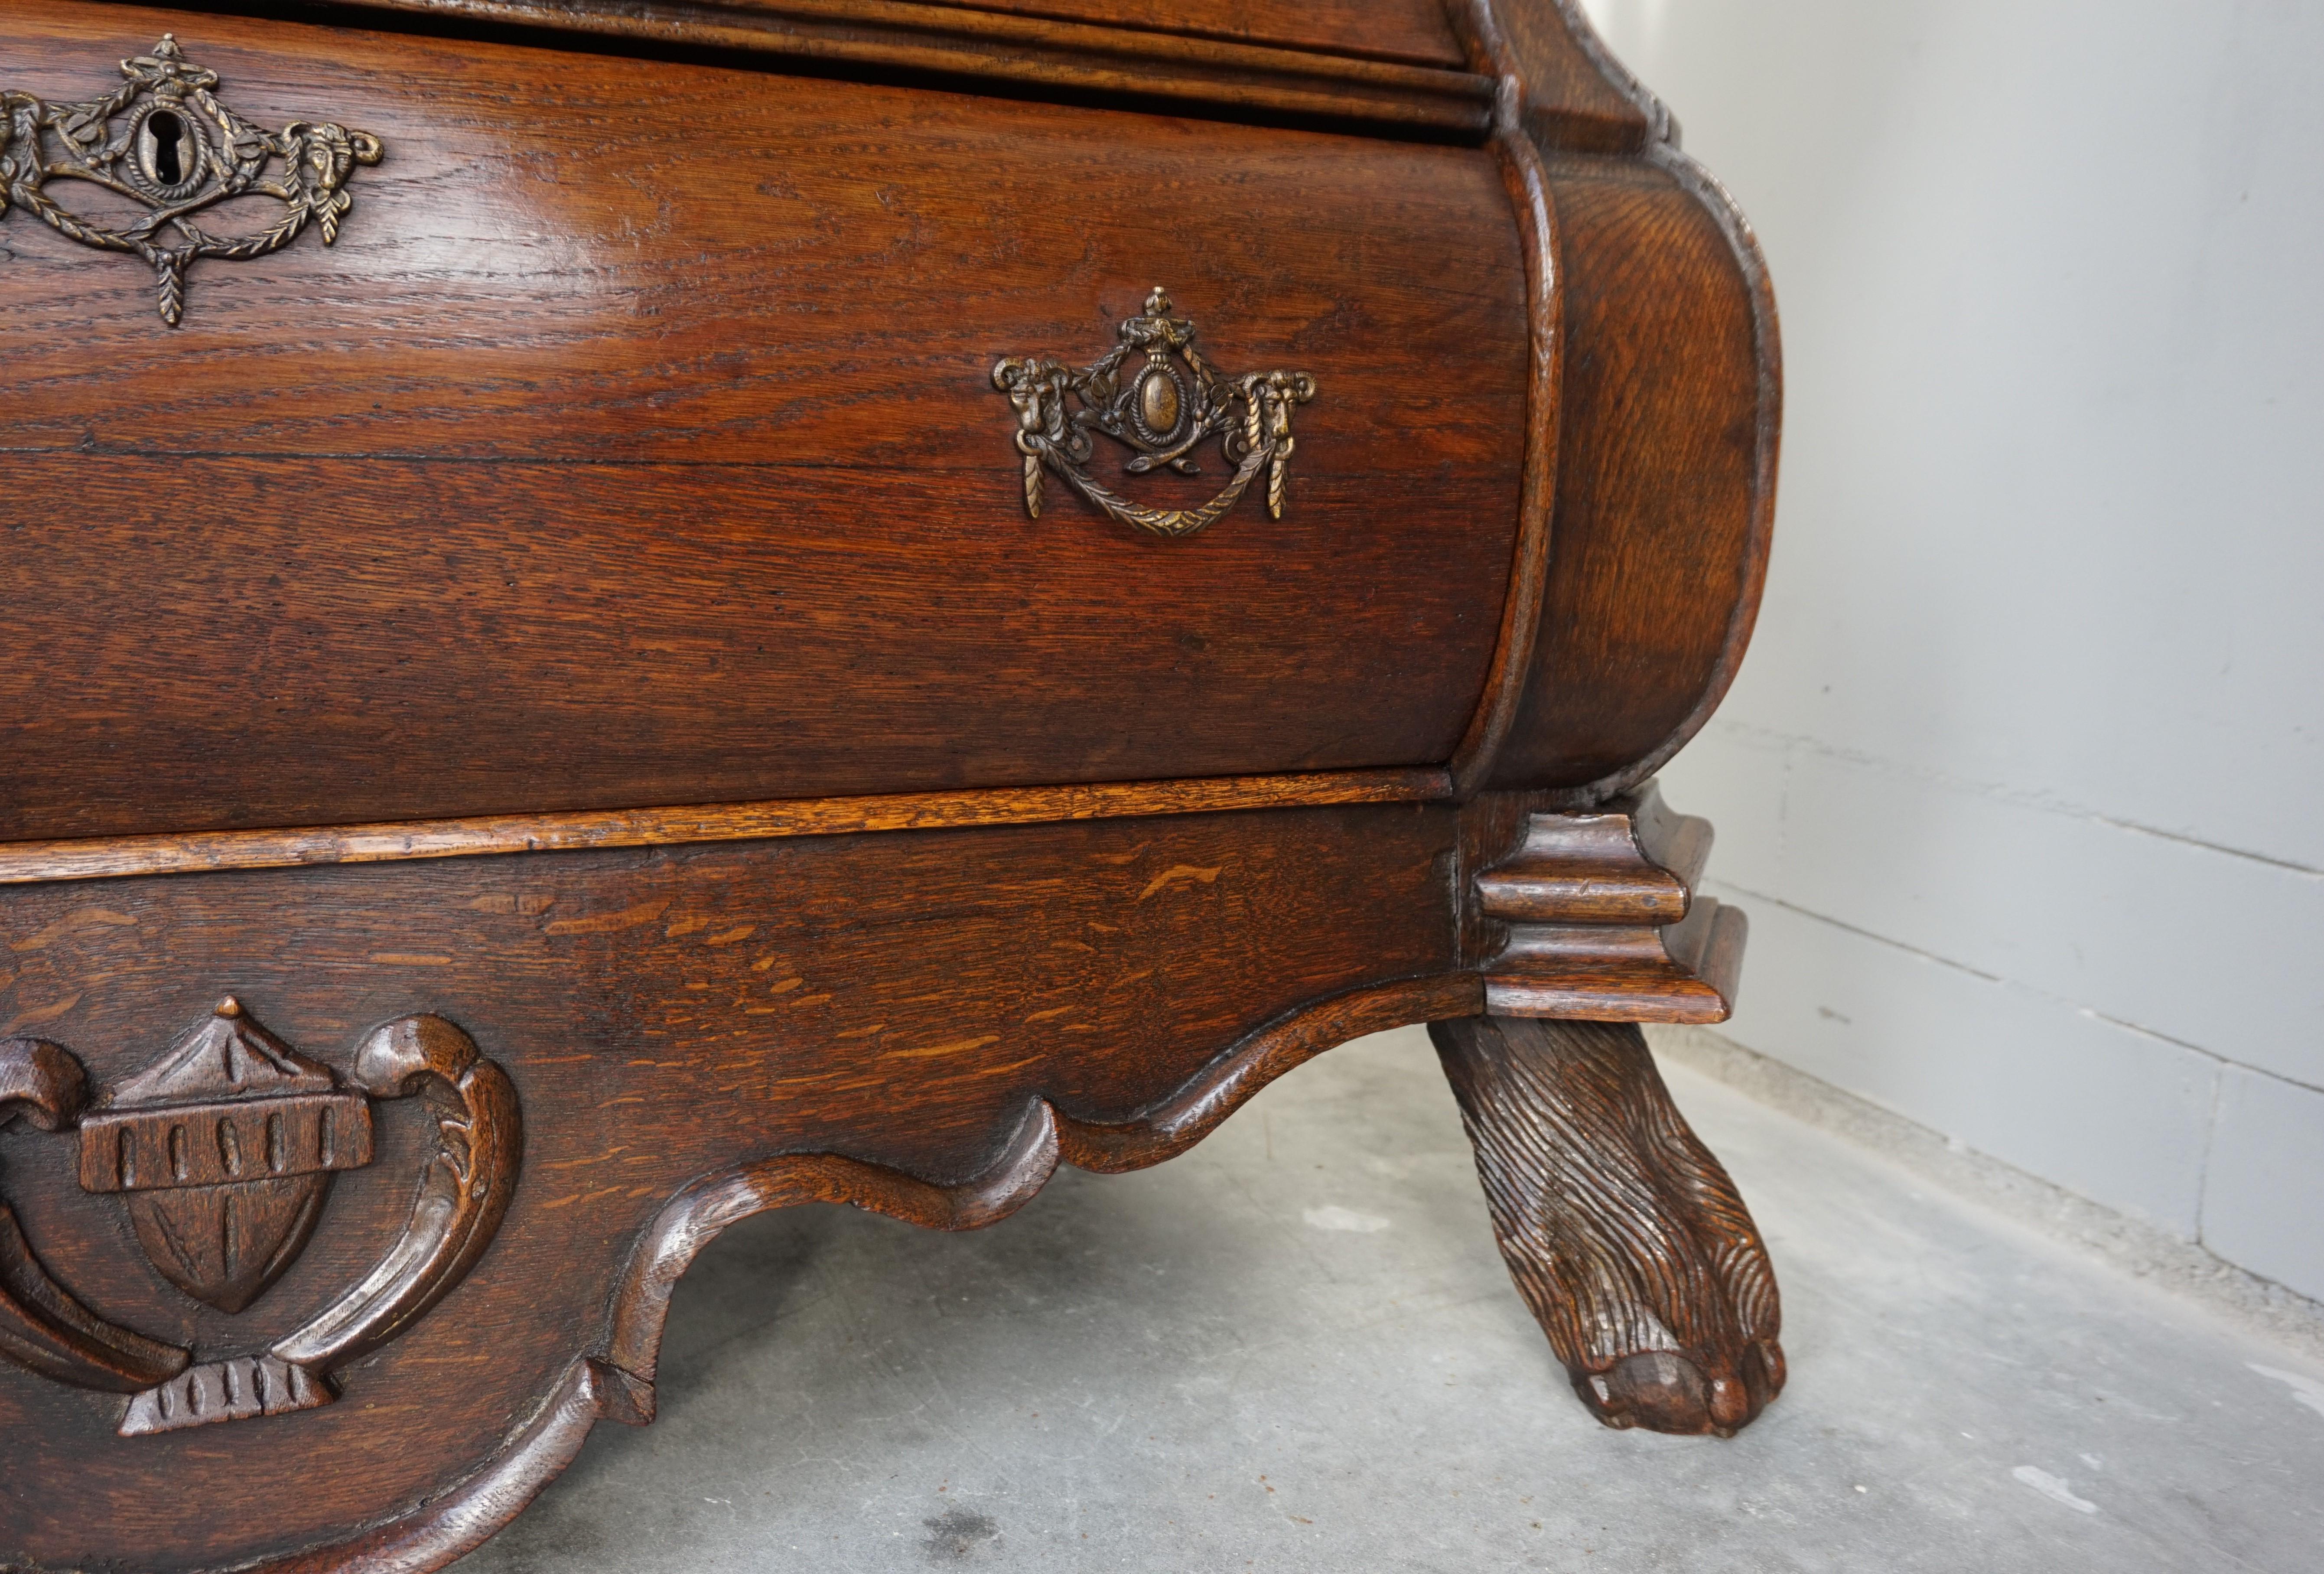 Antique 18th Century Dutch Rococo Oak Bomb Chest of Drawers with Claw Feet For Sale 4